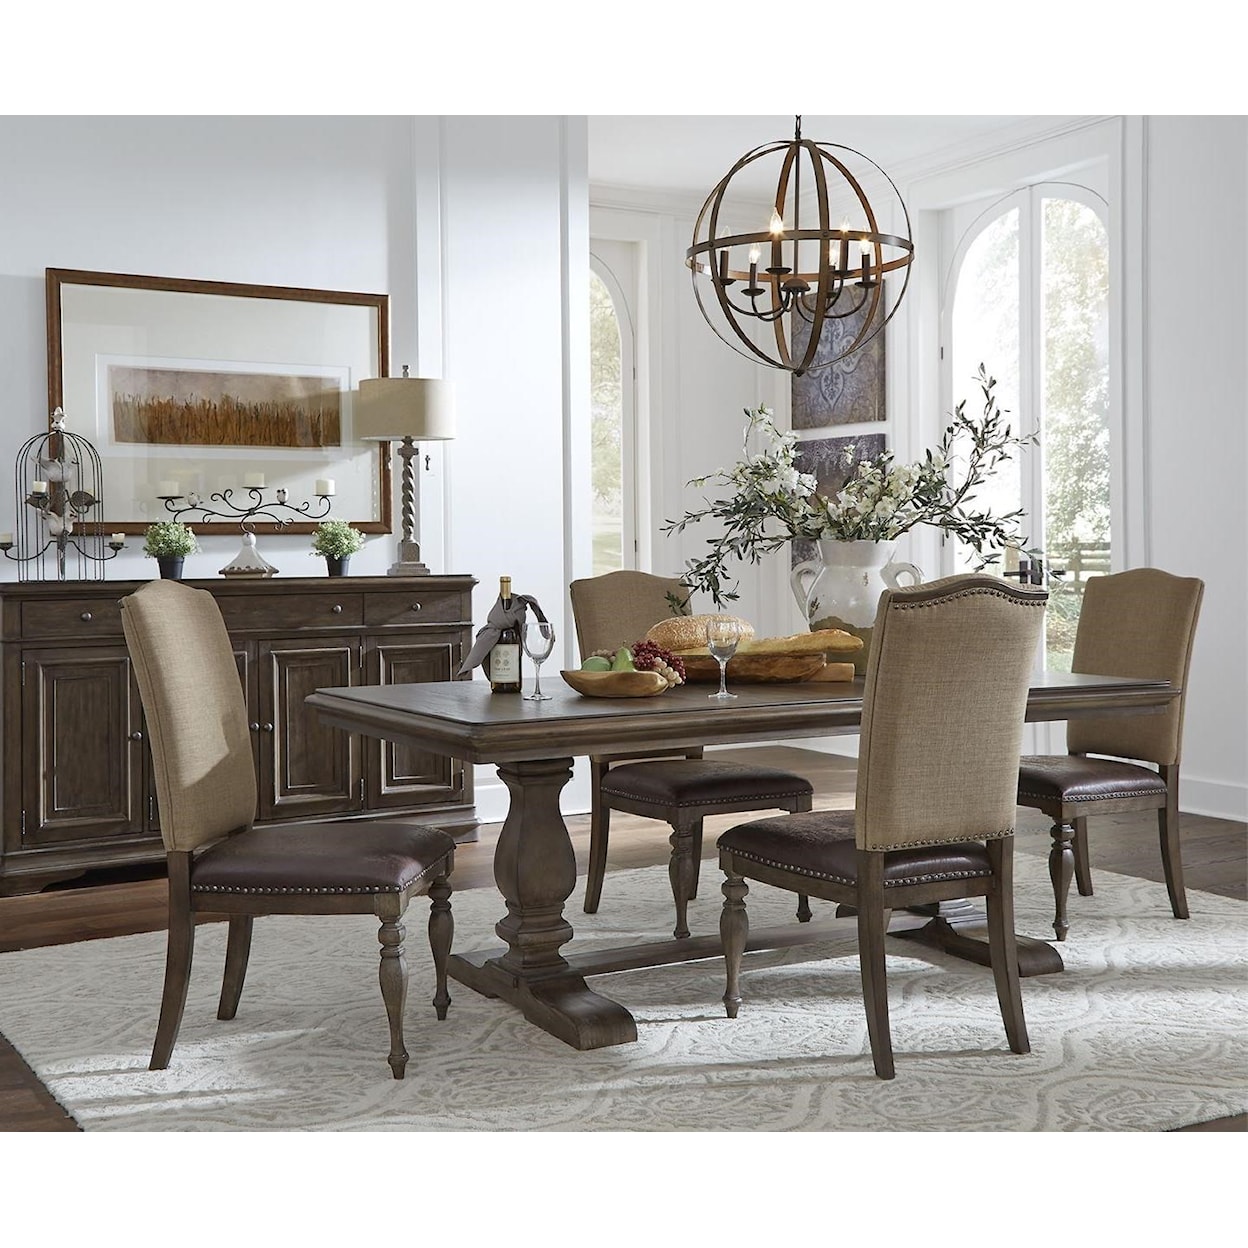 Liberty Furniture Homestead 5-Piece Table and Chair Set